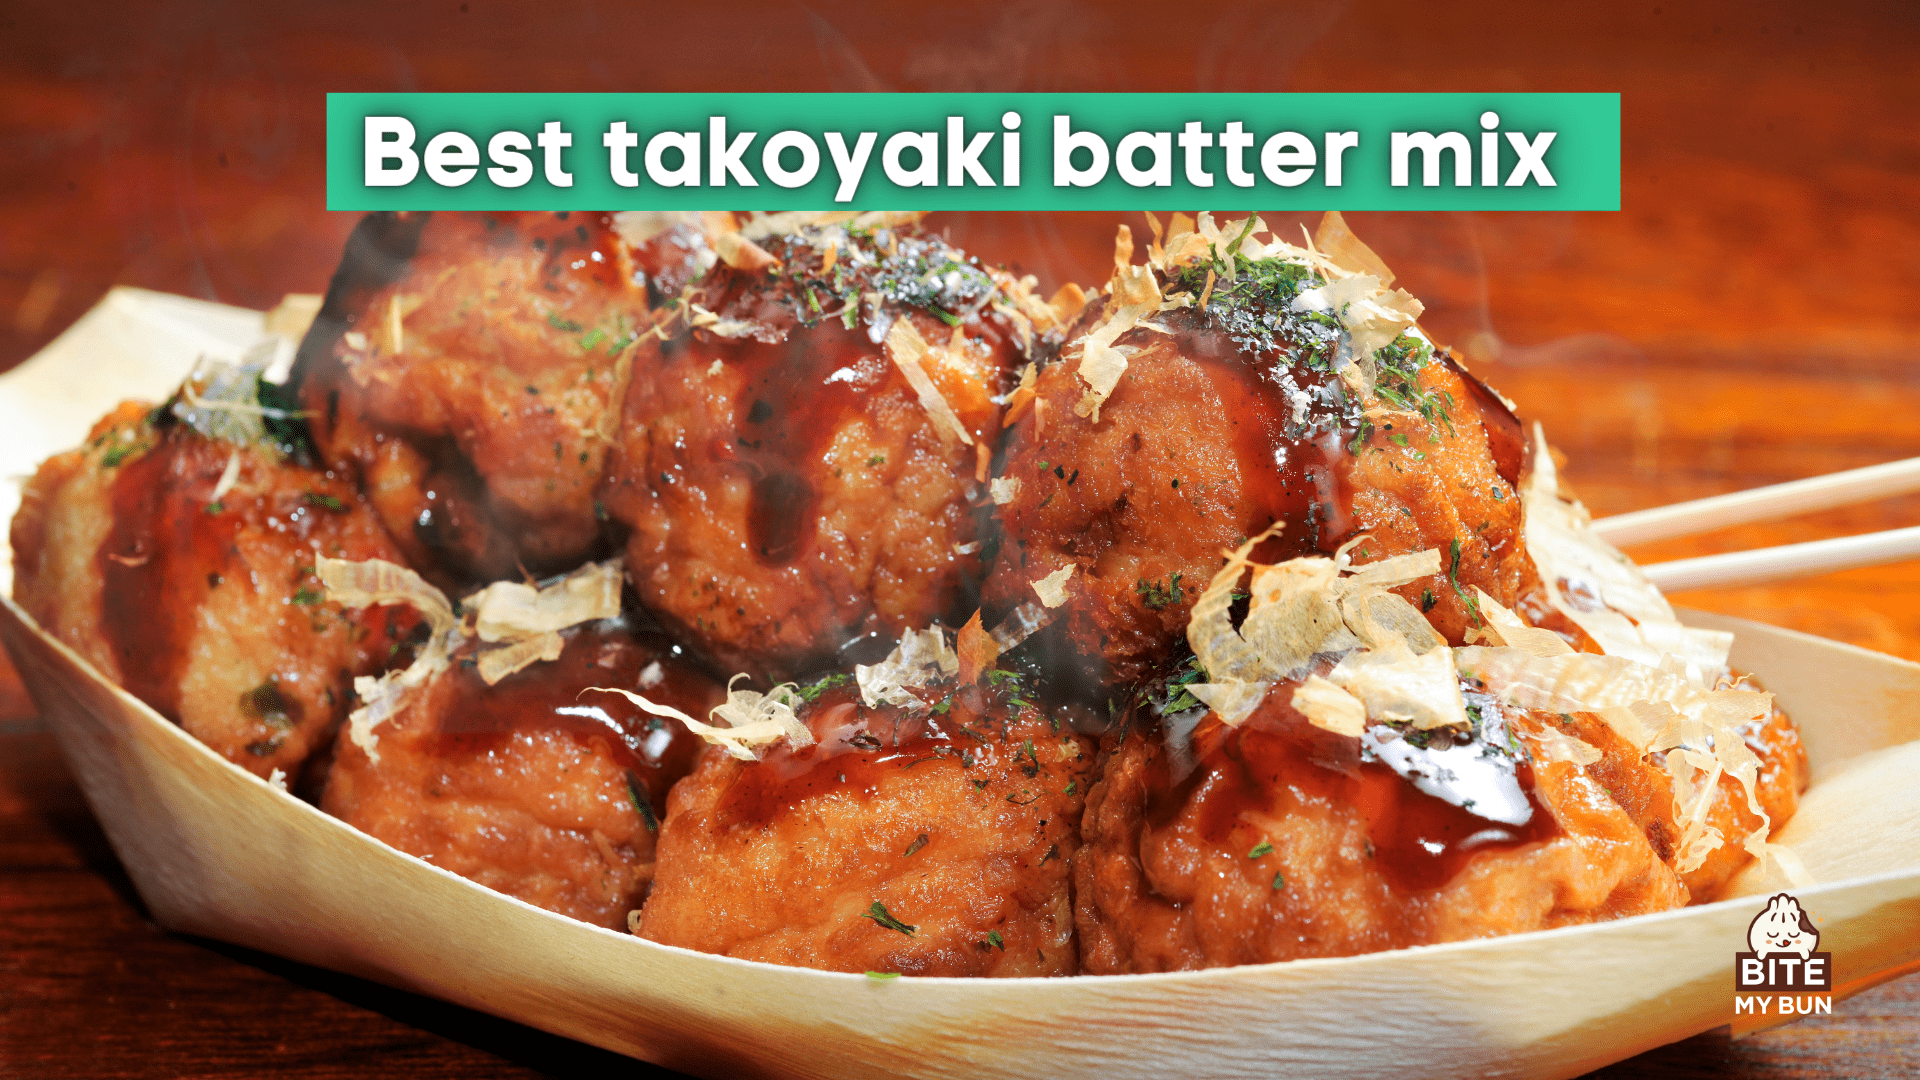 Best takoyaki batter mix | Top 4 to buy + how to make your own